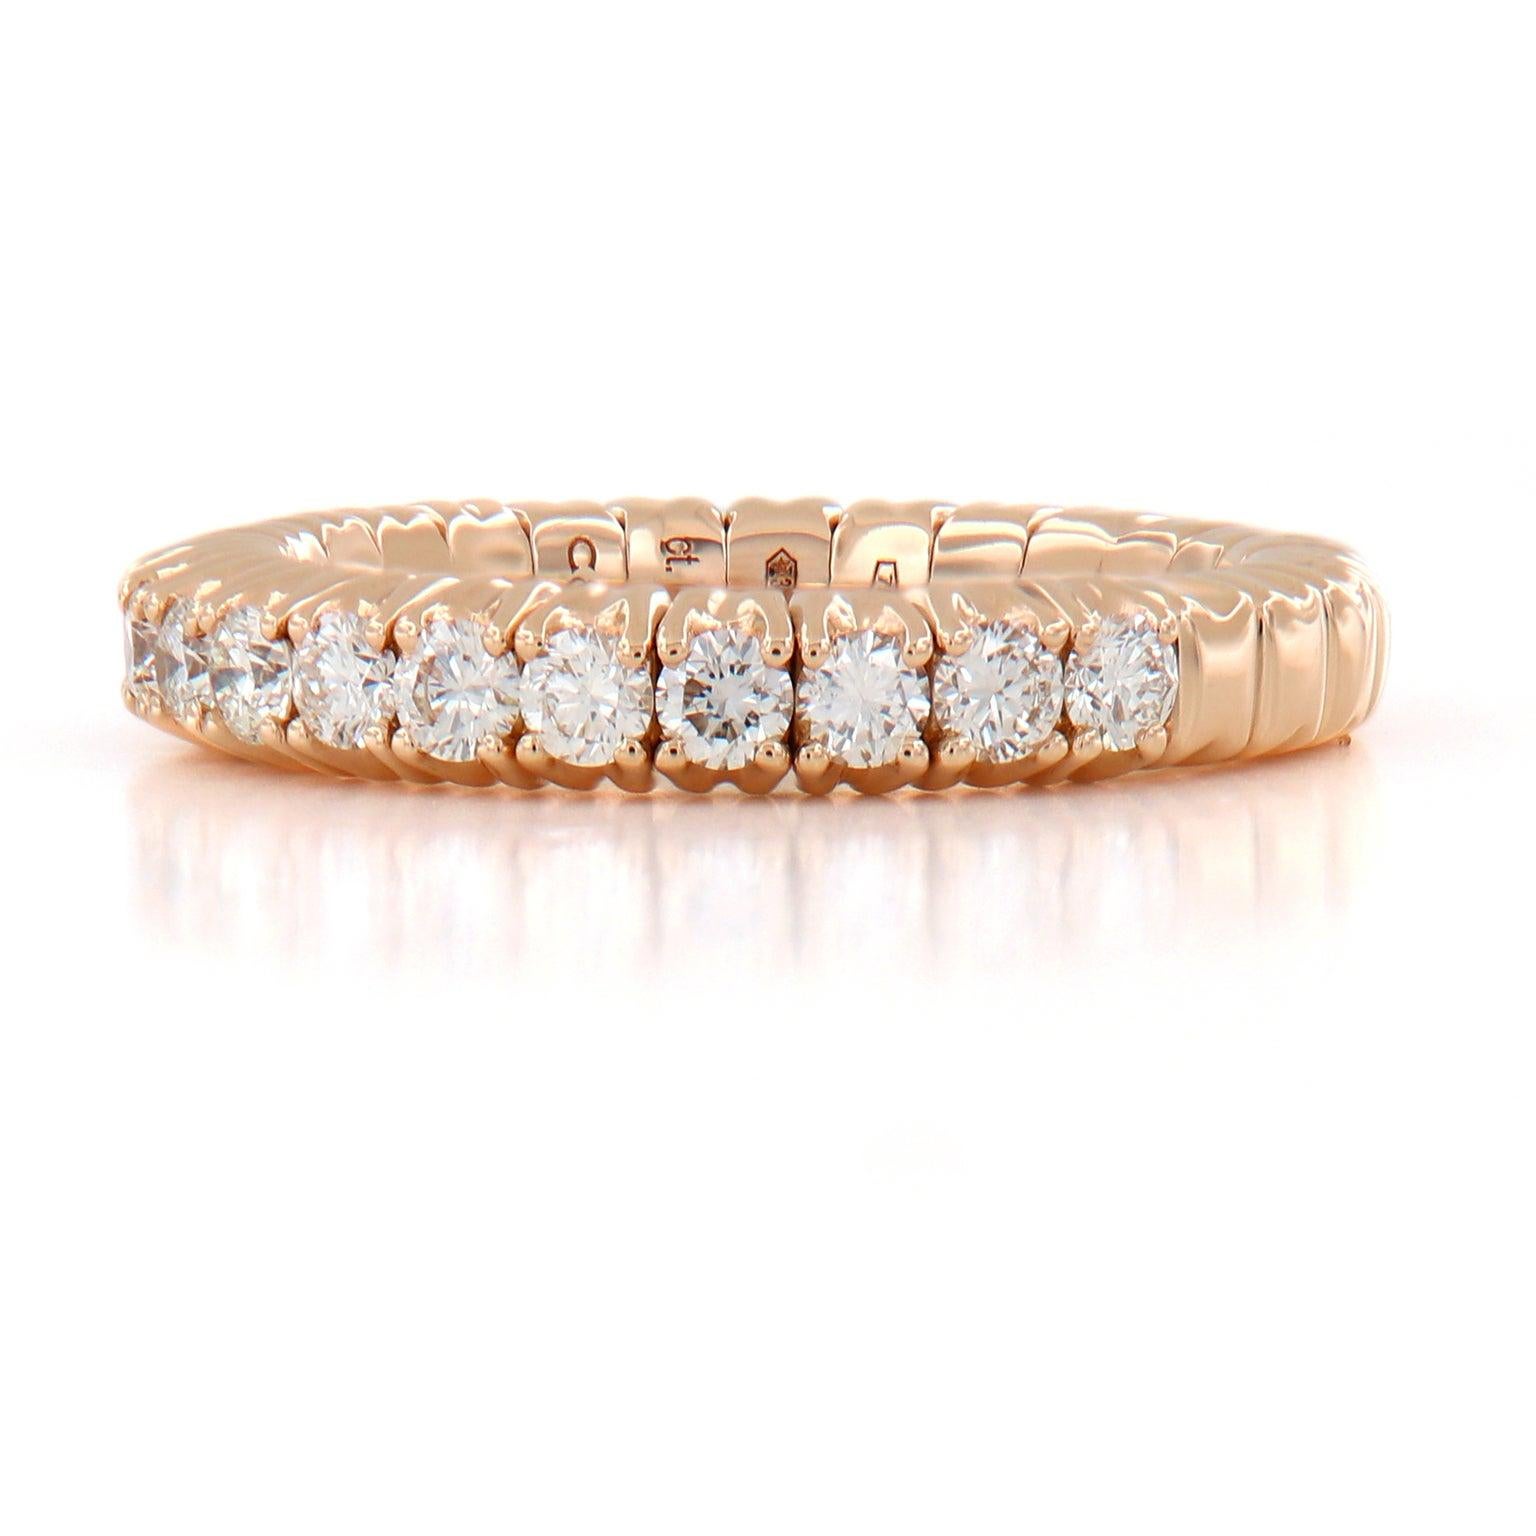 Made in Italy for Campanelli & Pear this beautiful stretchable diamond band ring is designed for comfort and perfectly fits one’s finger. It even fits those with larger knuckles! The ring is crafted in 18k rose gold and features 17 round brilliant